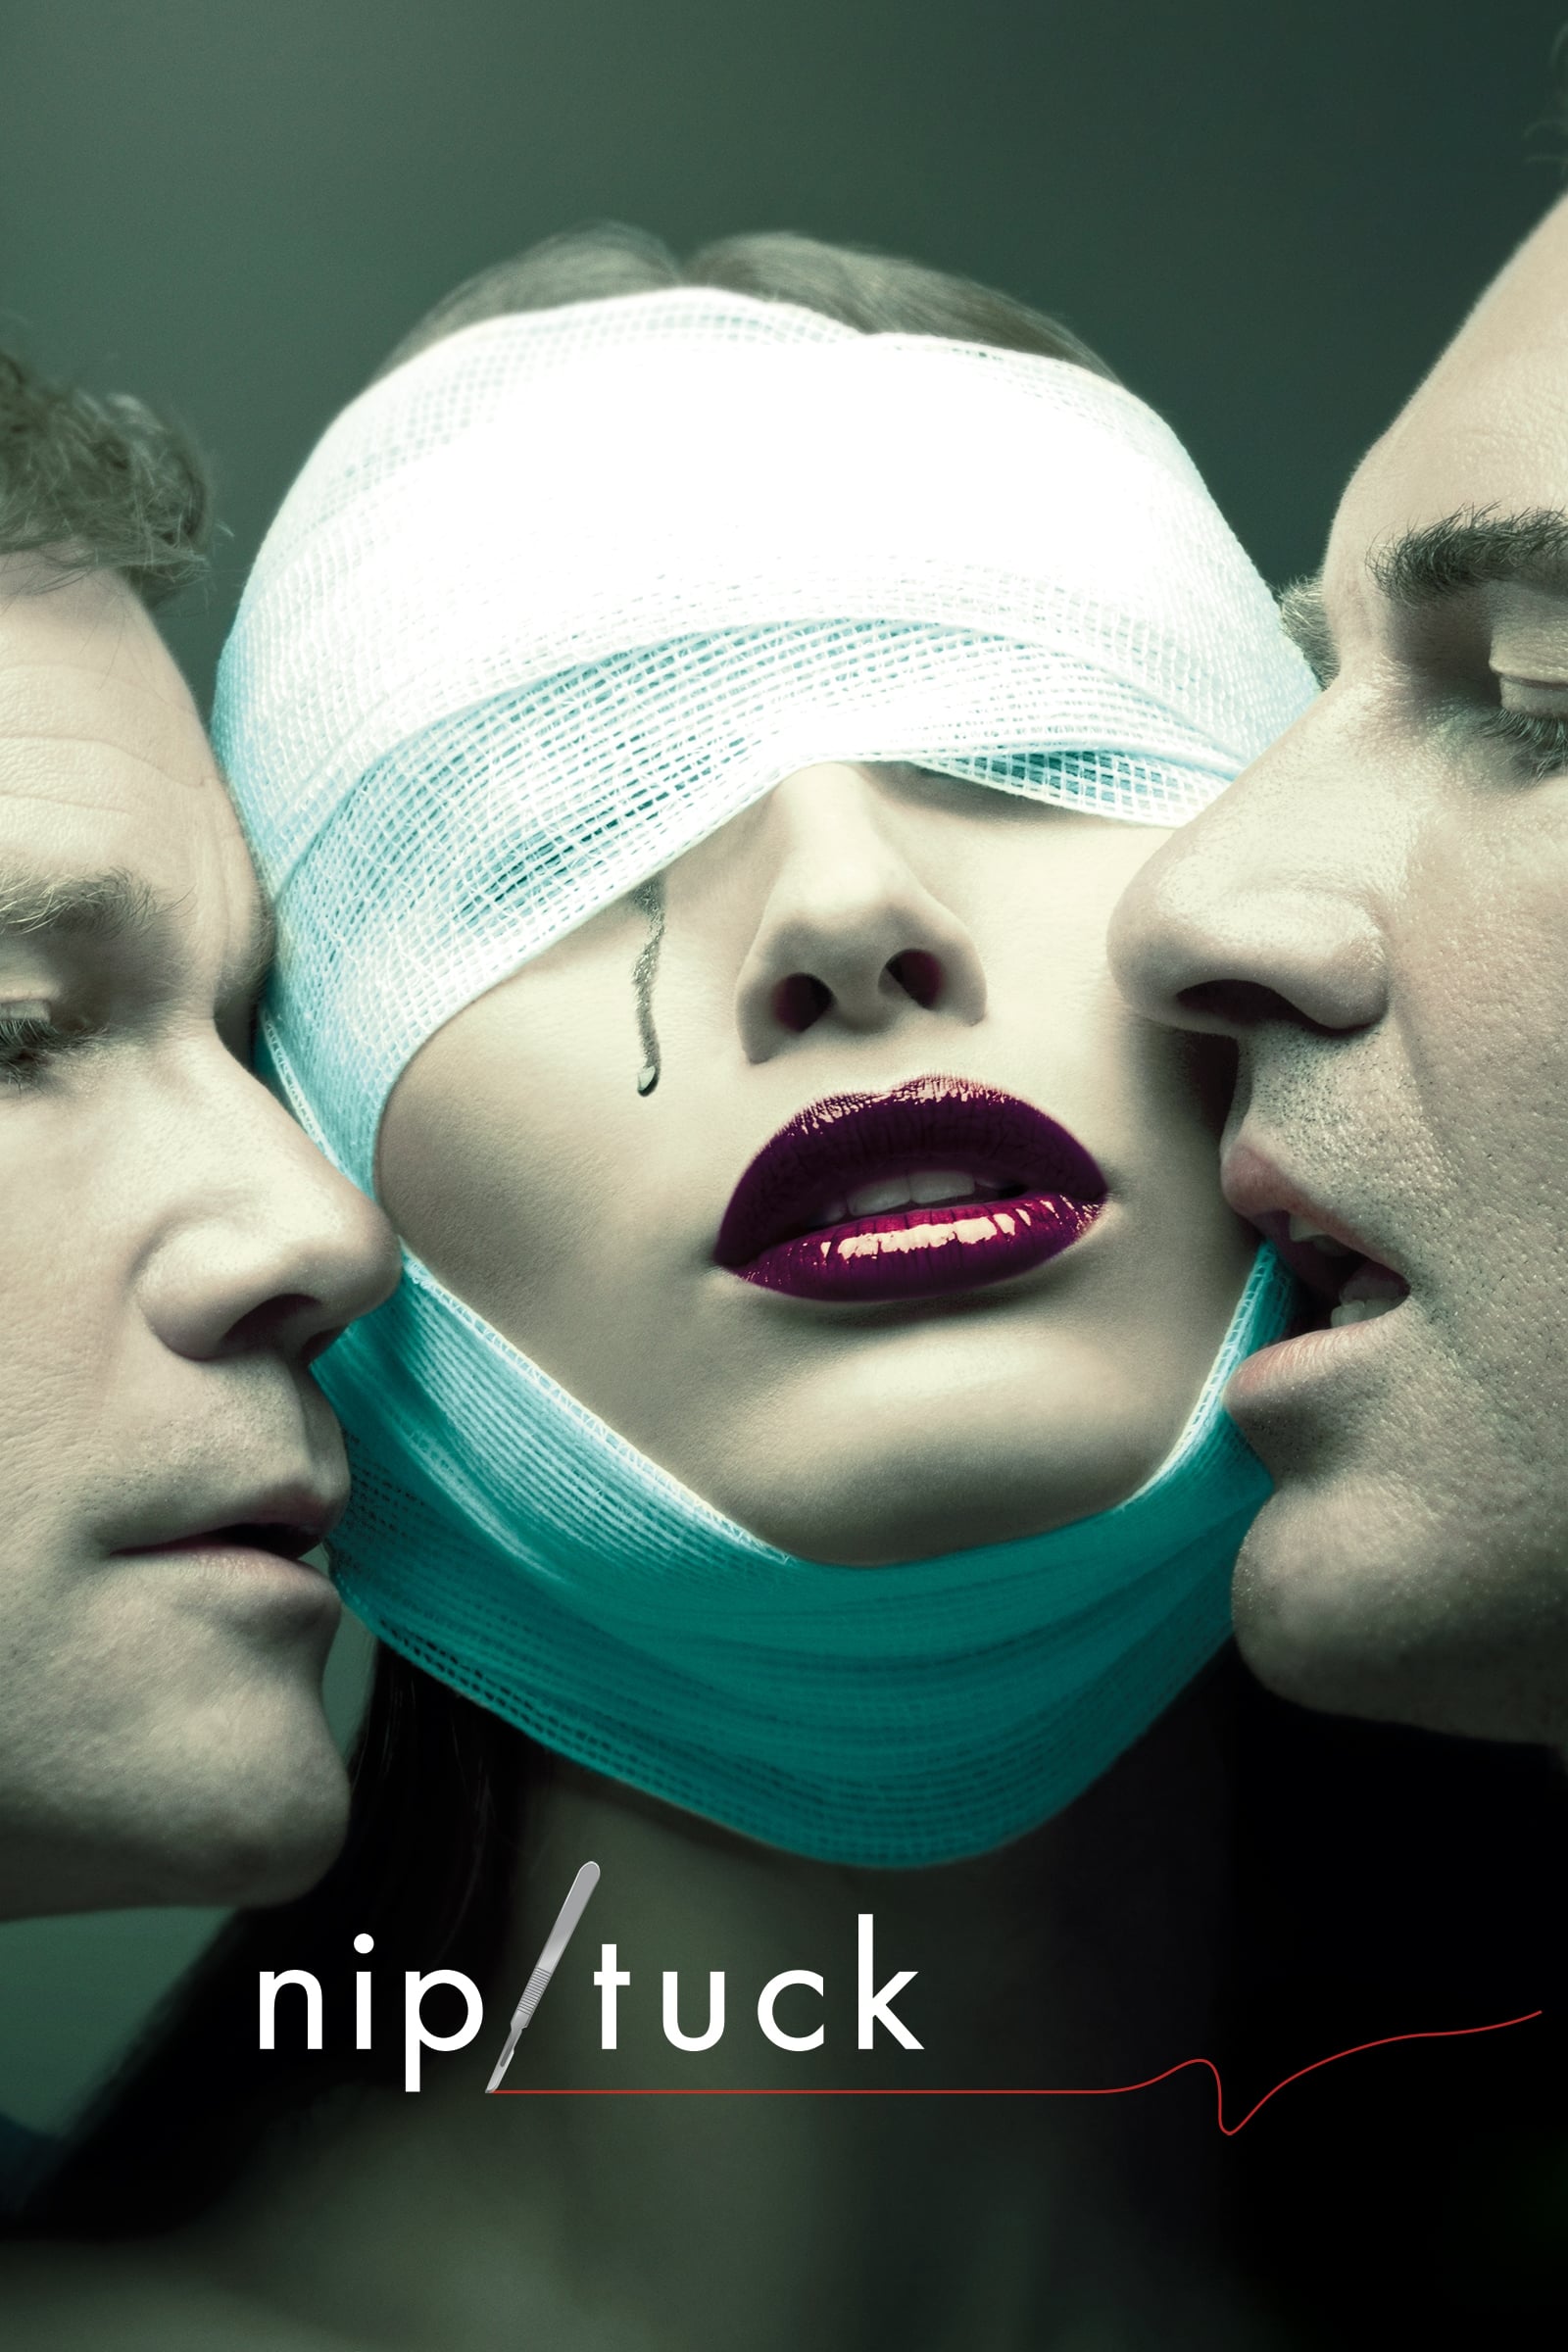 Nip/Tuck TV Shows About Plastic Surgery